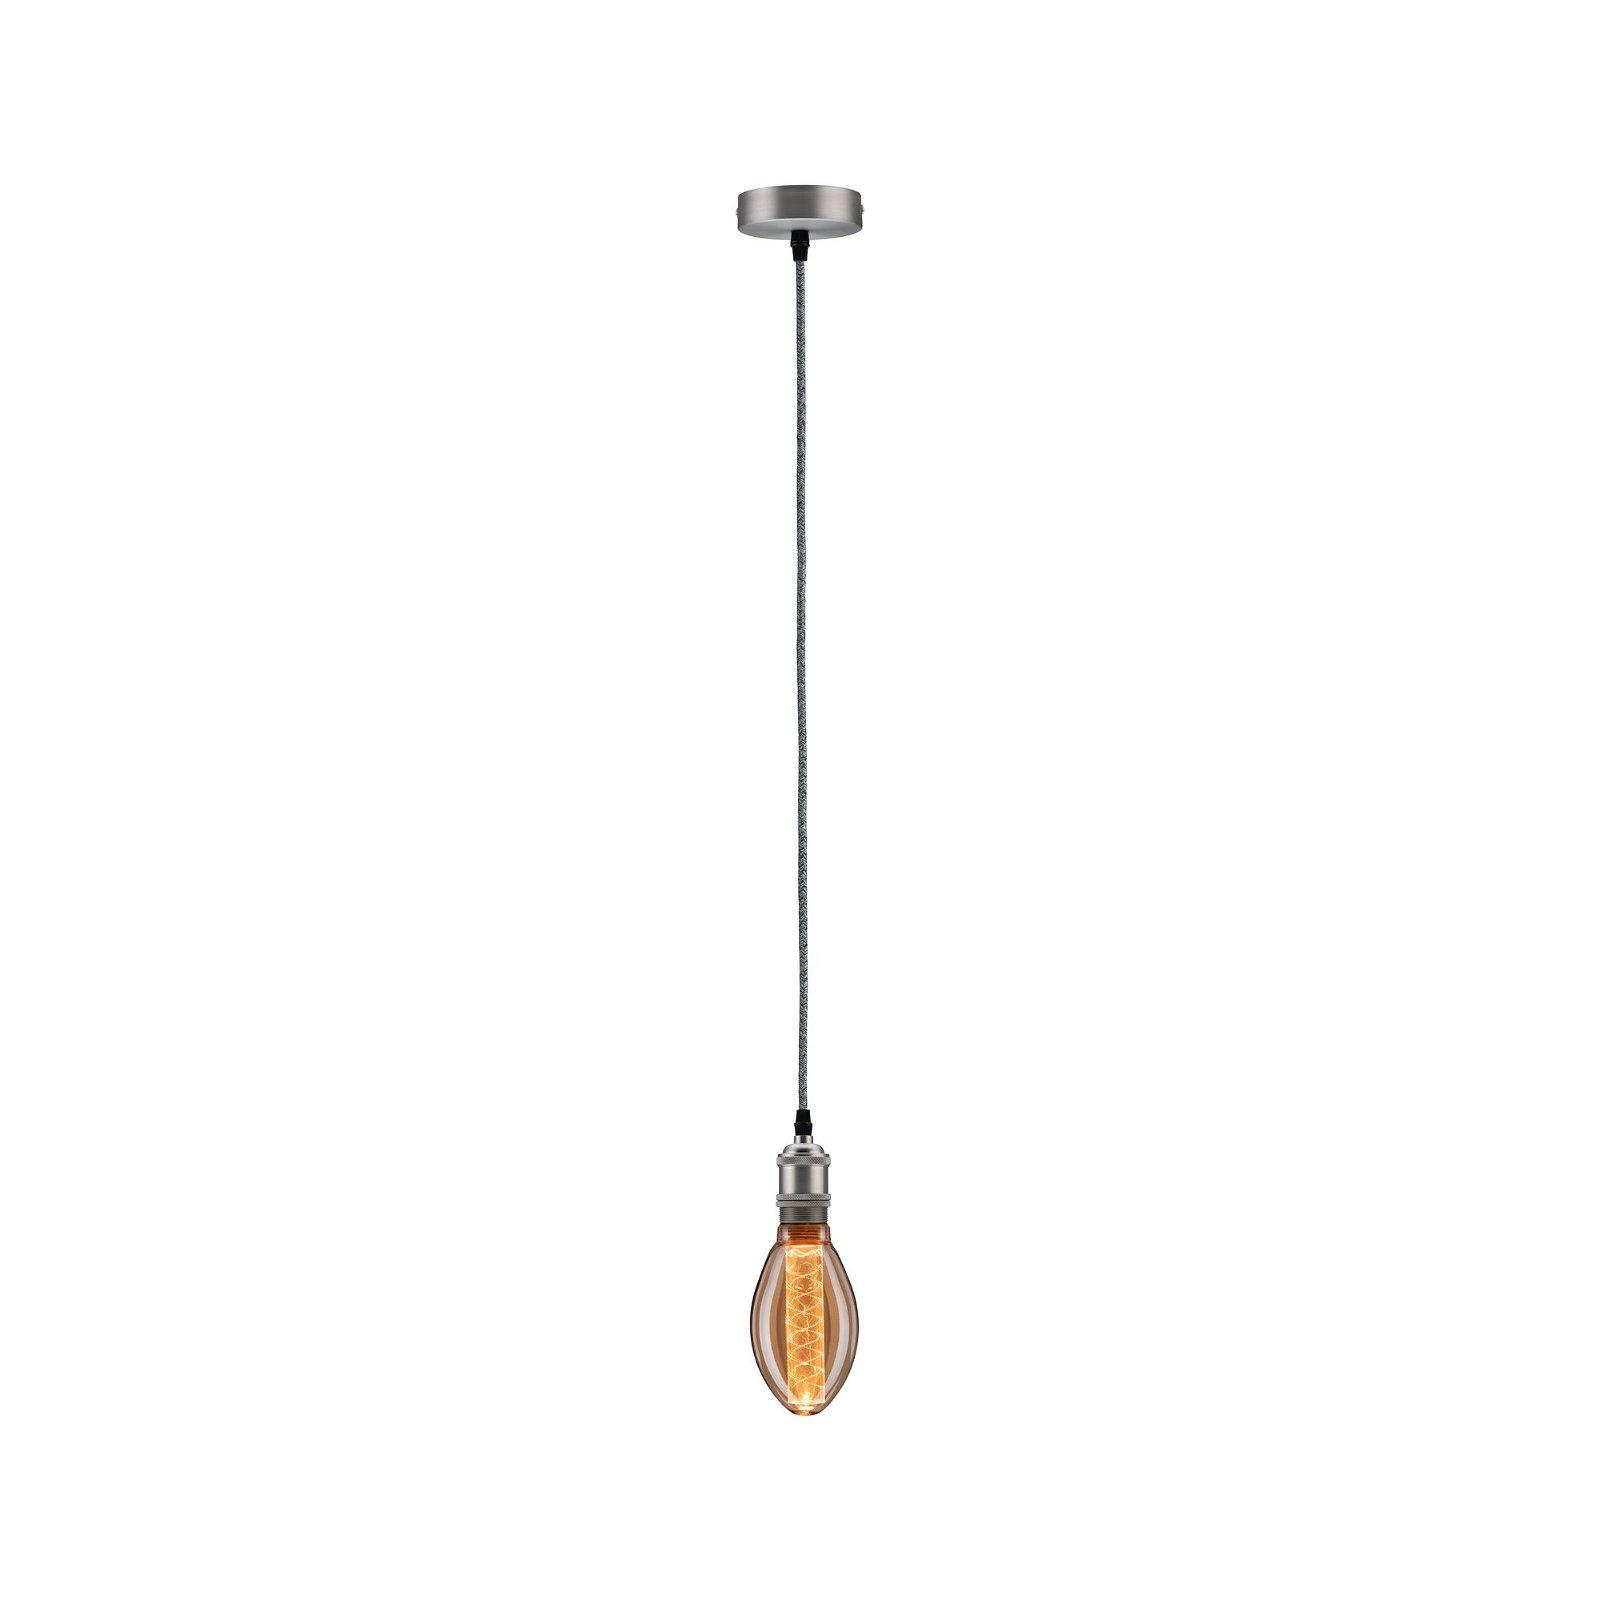 Inner Glow Edition LED Pear Internal corn spiral pattern E27 230V 120lm 3,6W 1800K dimmable Gold